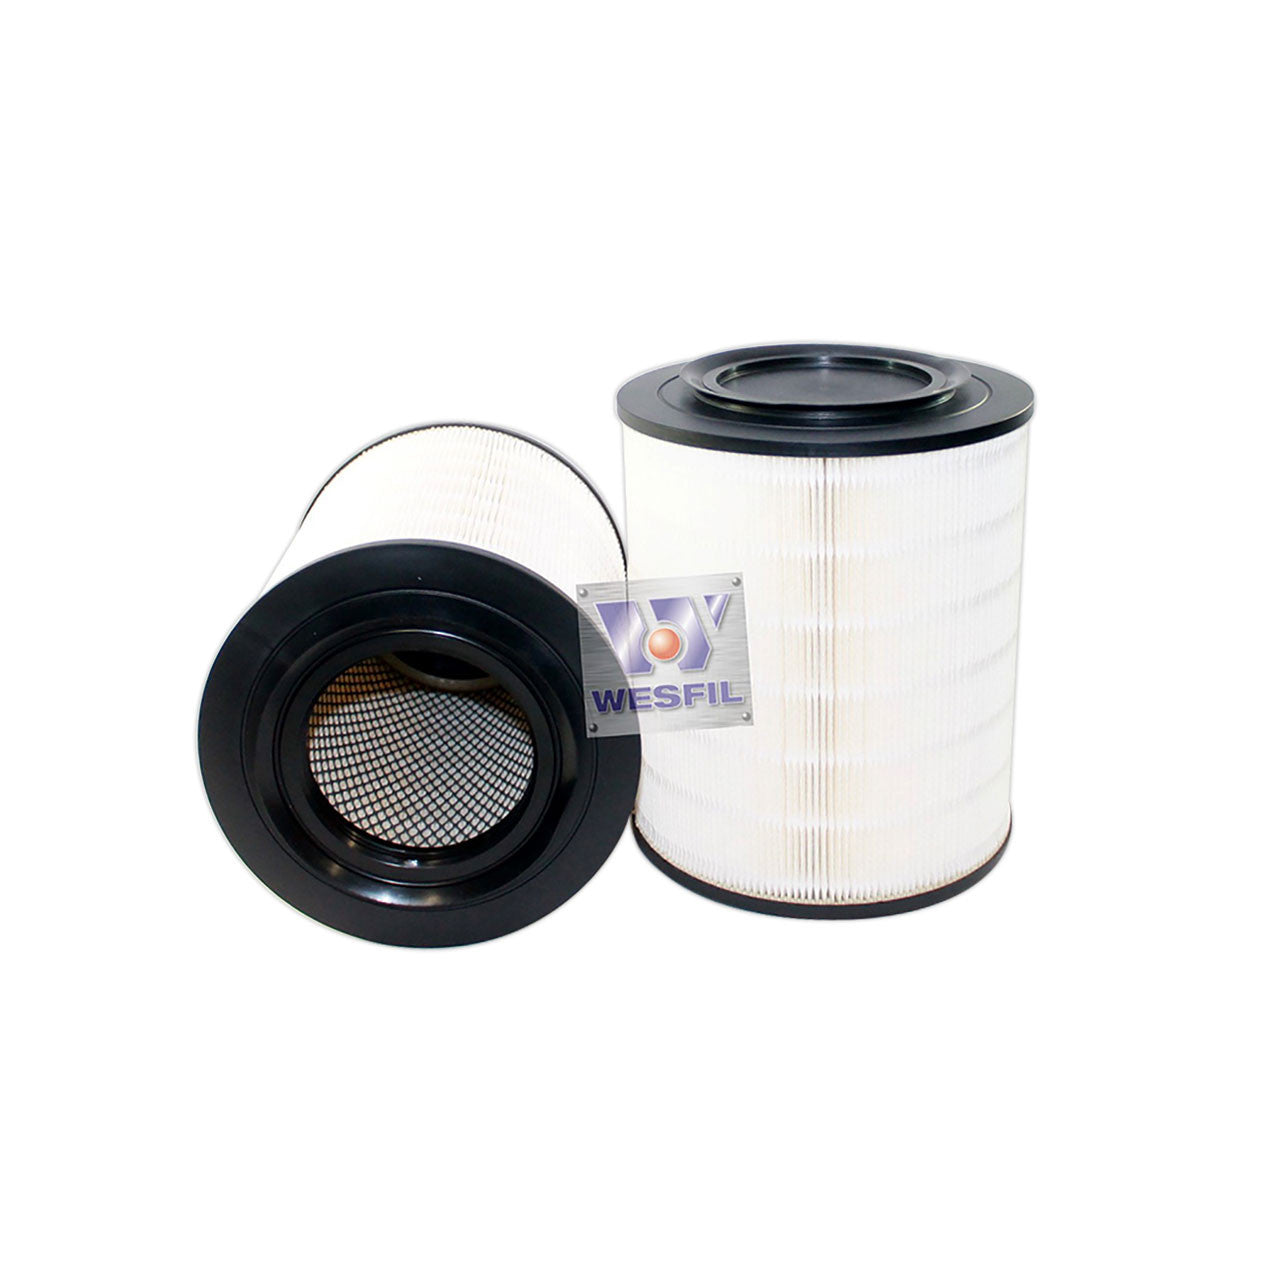 WA1091 Wesfil Air Filter for Ford (Cross Ref: A1453)